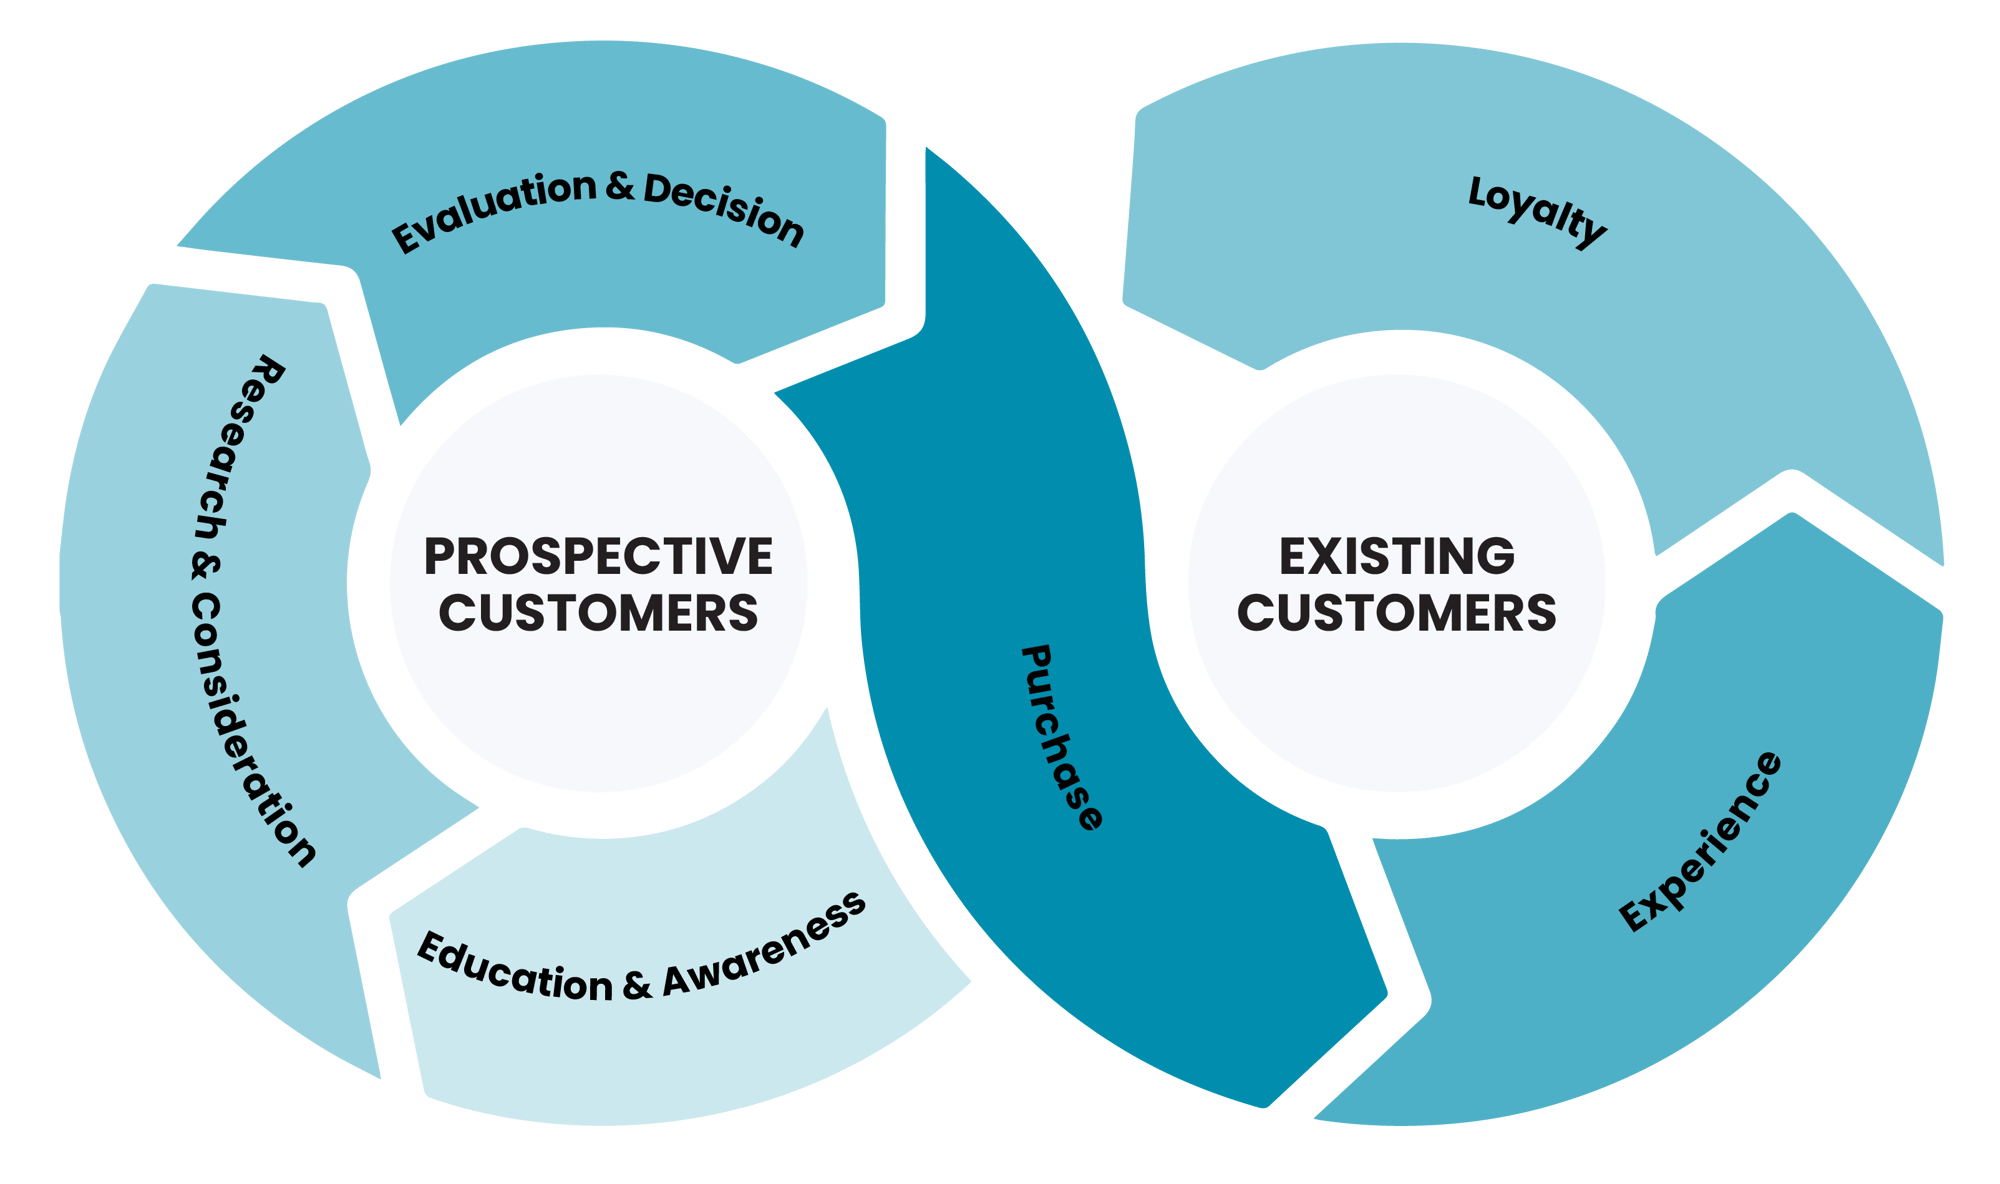 A graphic of an infinite loop in two main phases: prospective customers and existing customers.